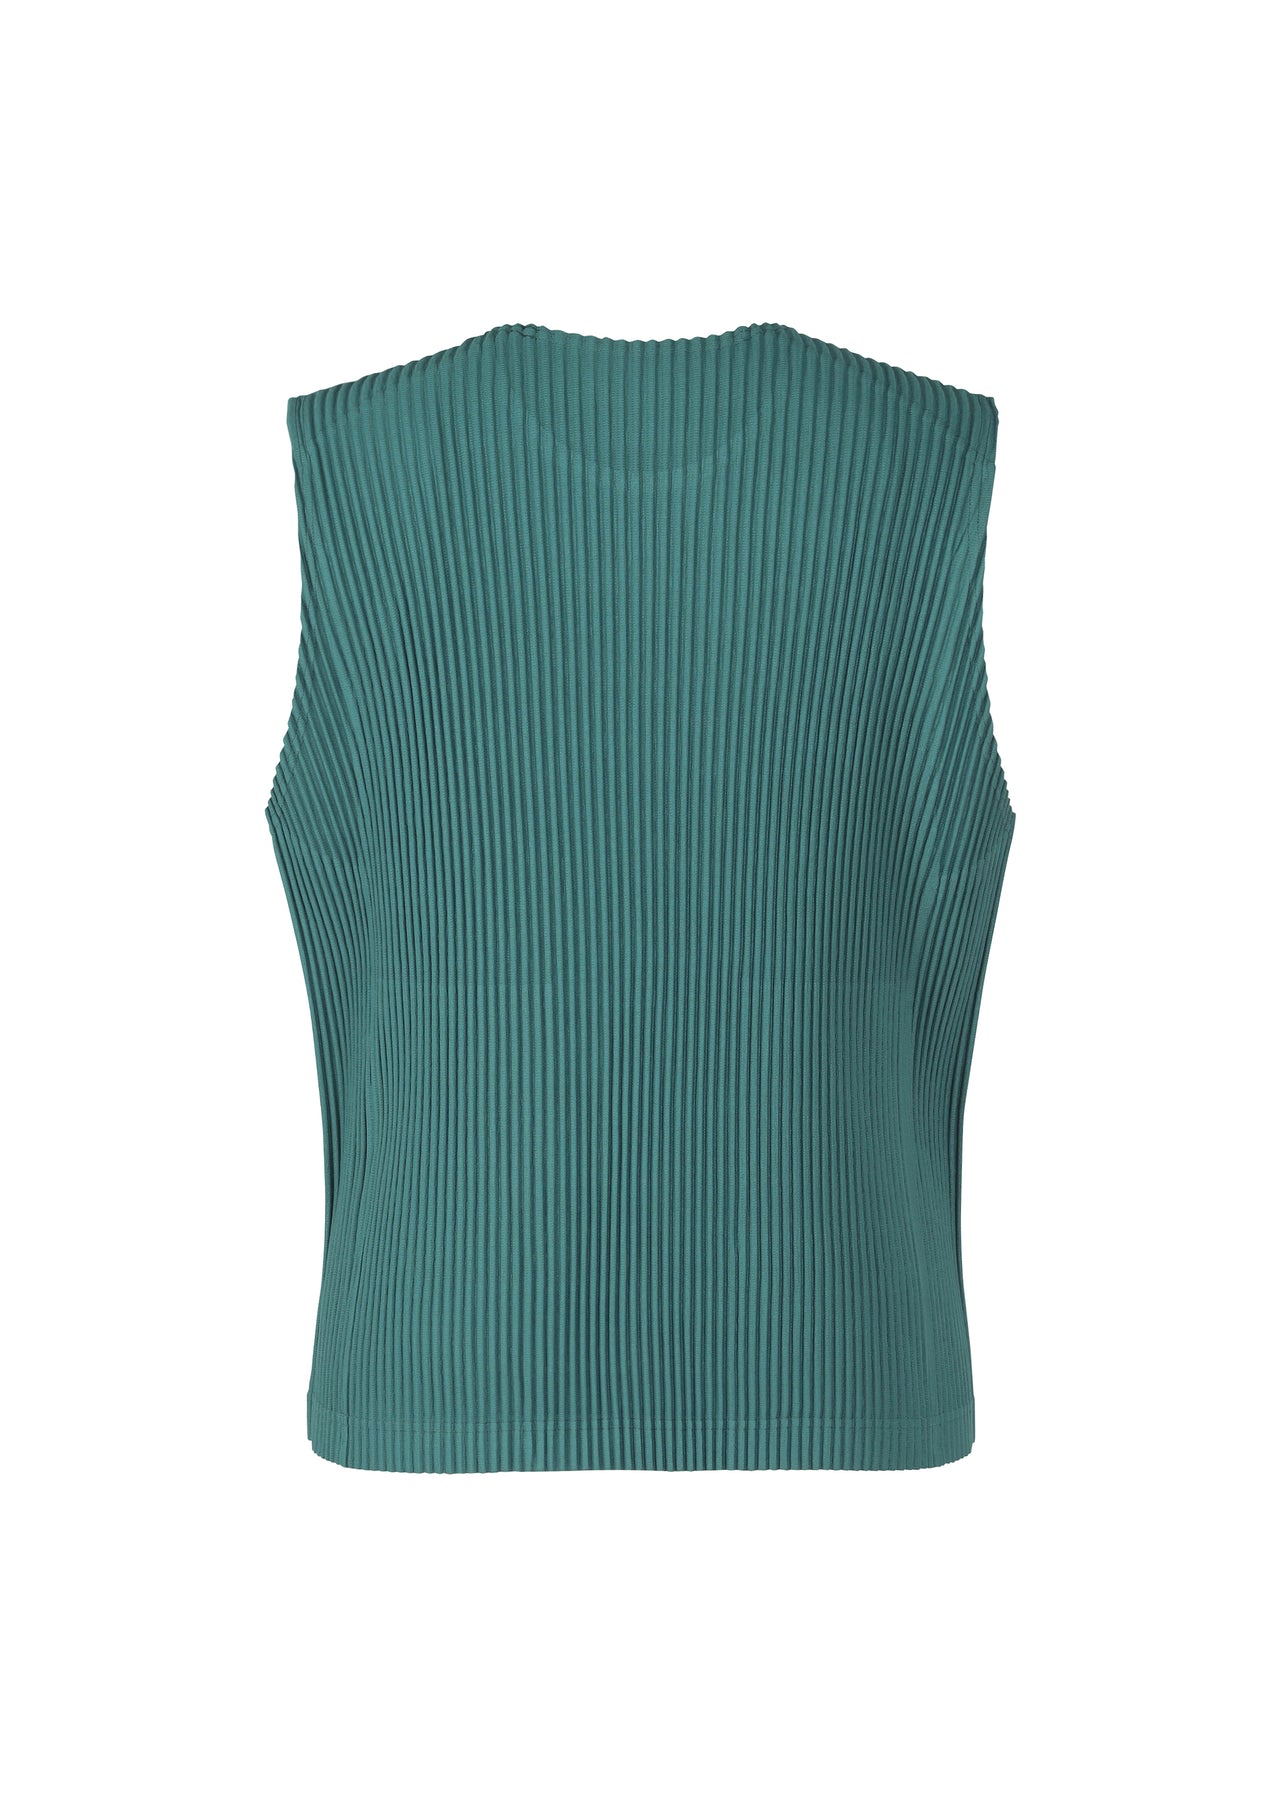 TAILORED PLEATS 2 VEST | The official ISSEY MIYAKE ONLINE STORE